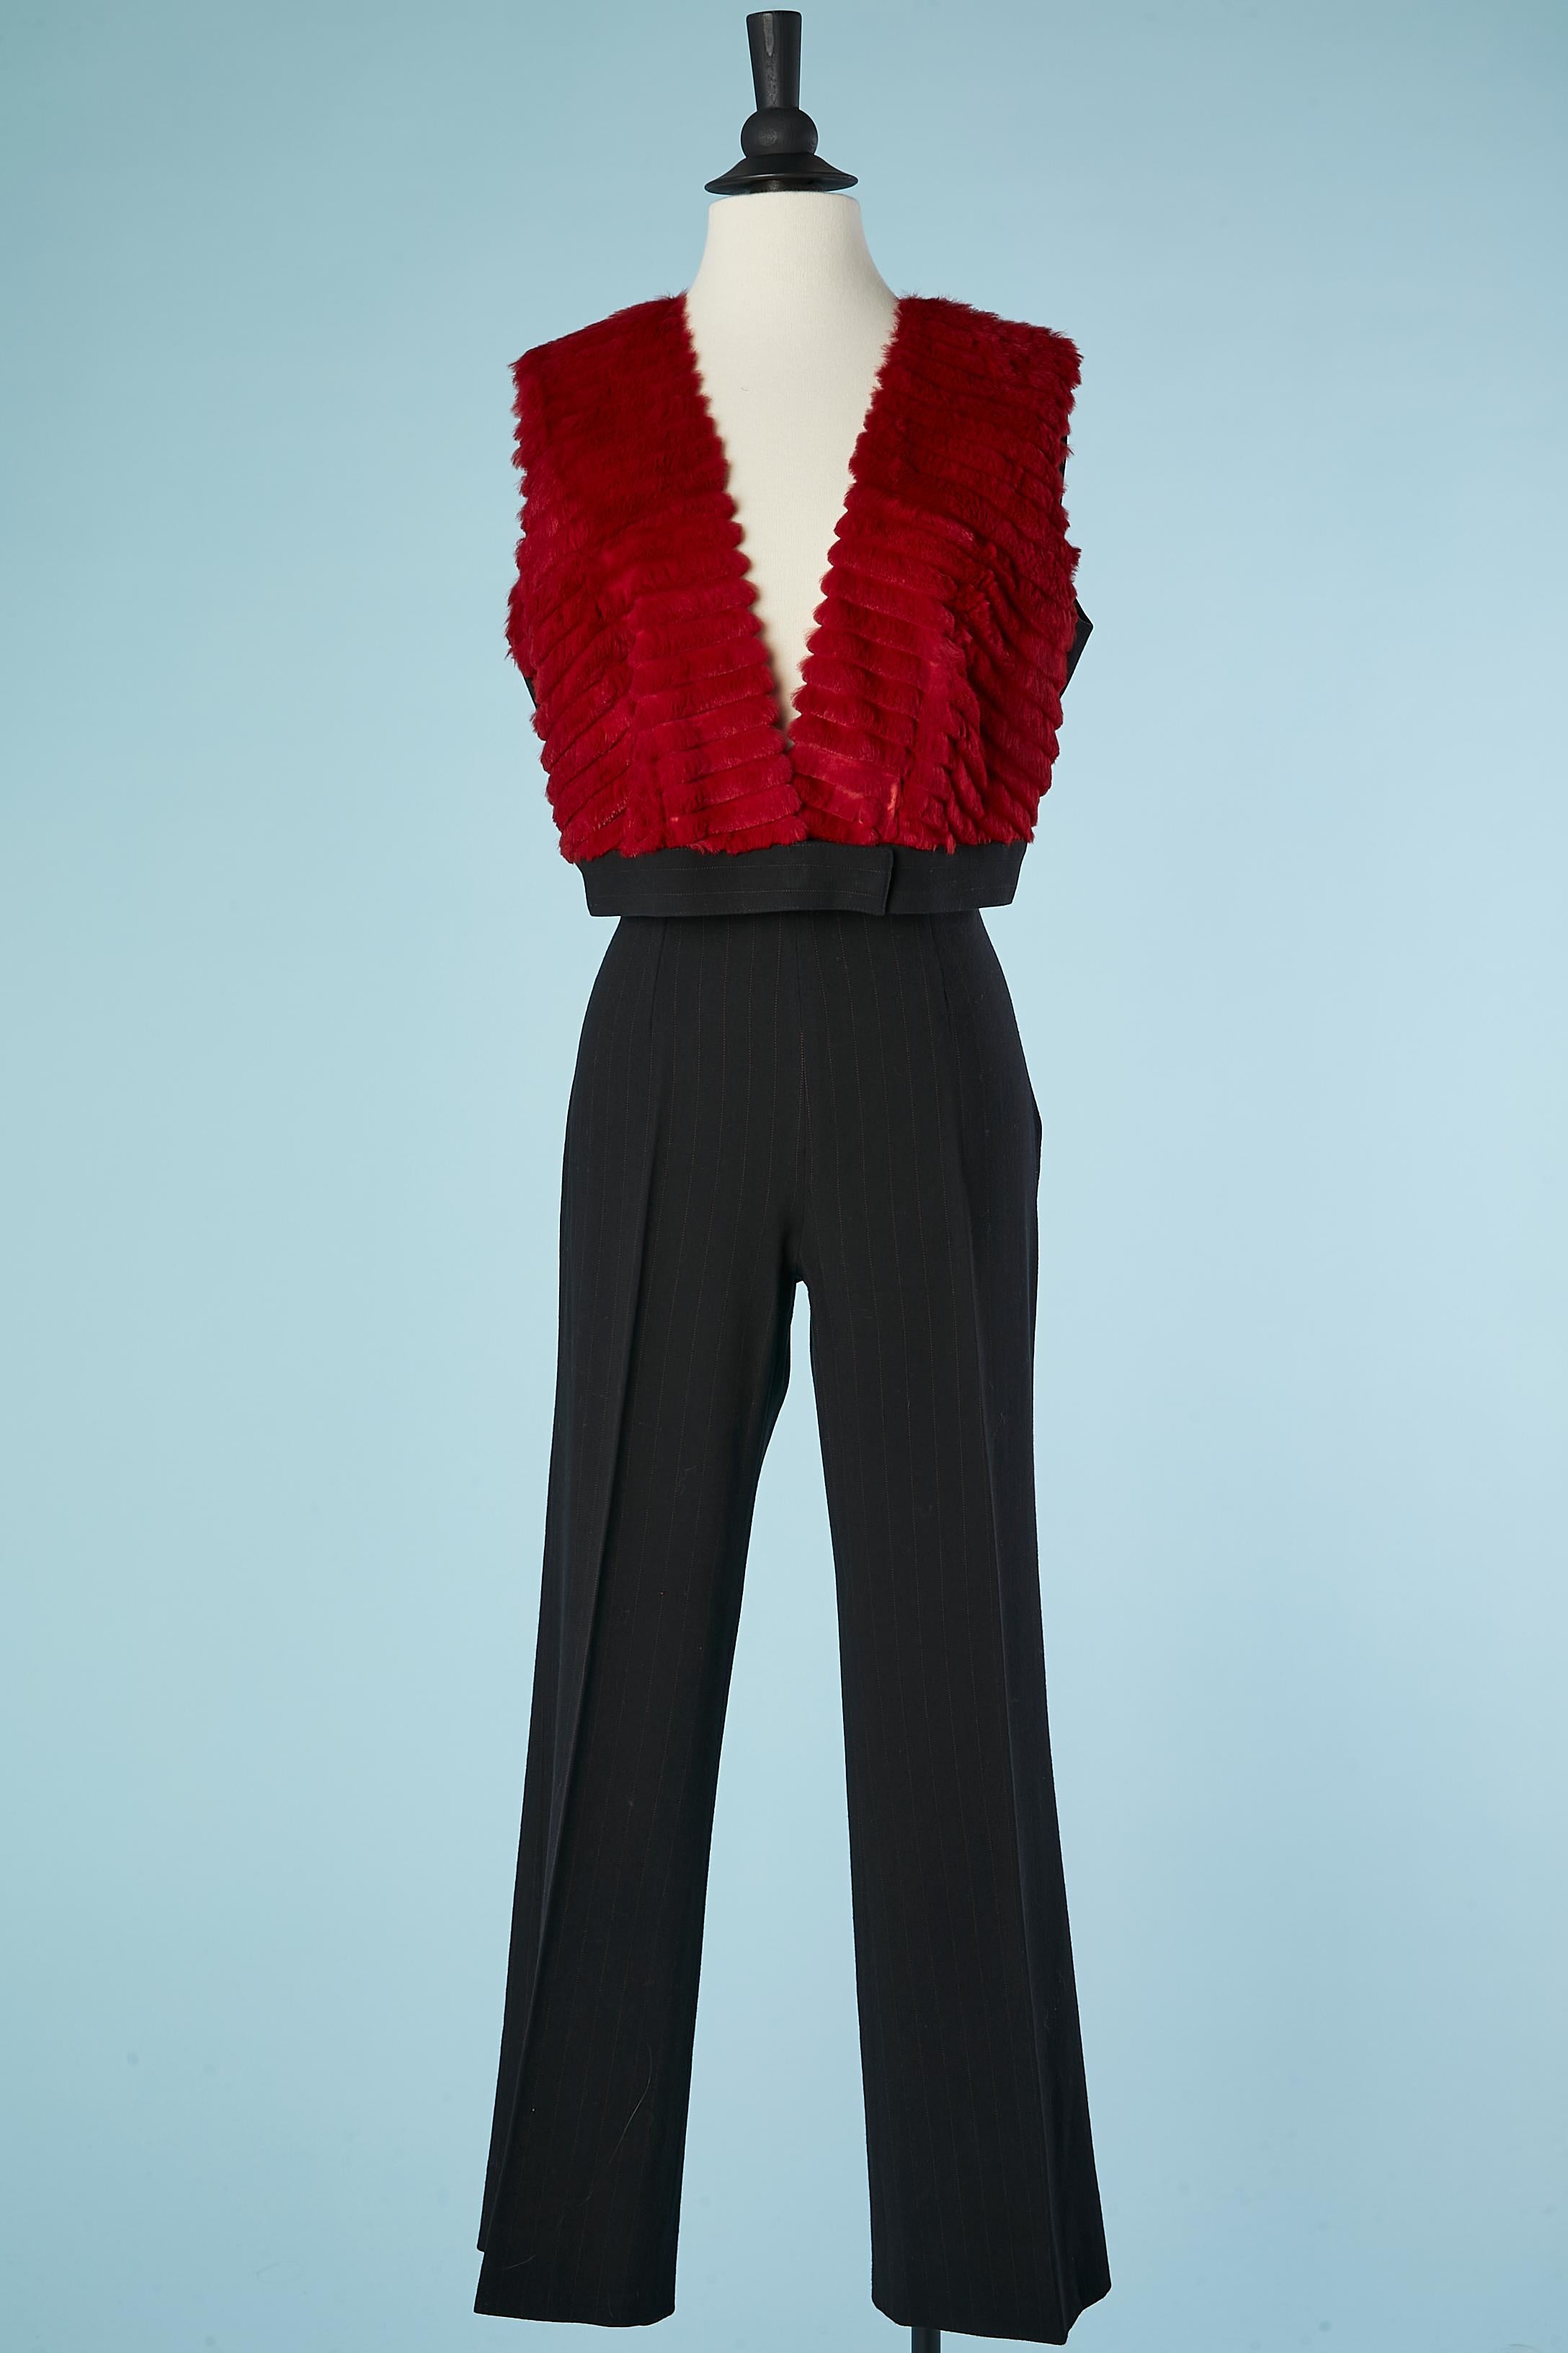 Black wool and red pin-stripe trouser-suit and fur vest Gianfranco Ferré Studio 3